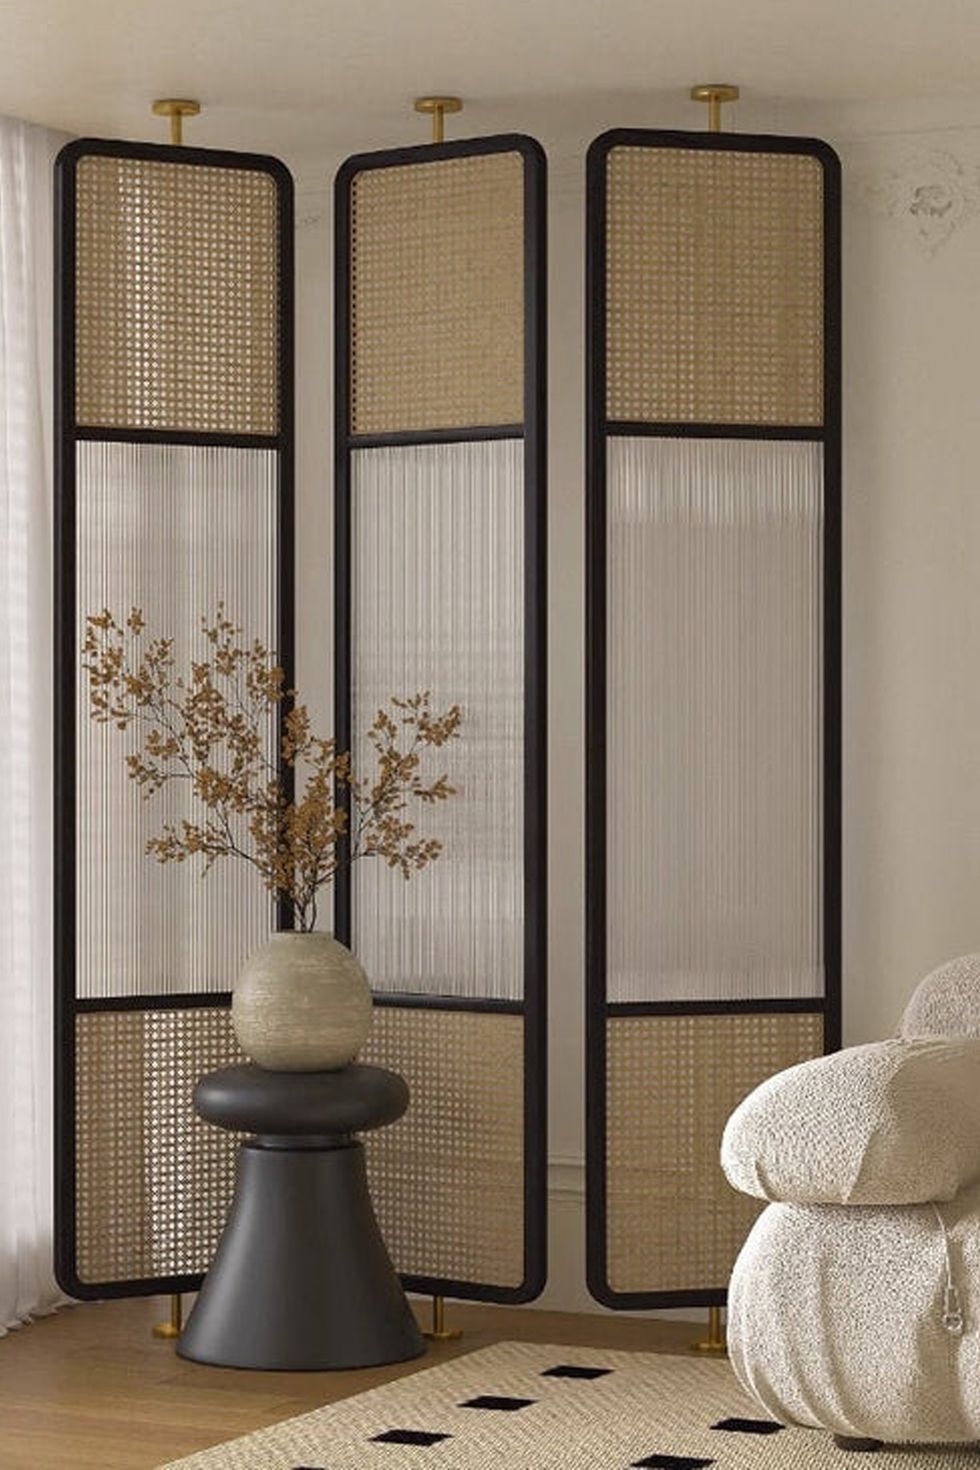 pamper haus design shop, mid century modern fluted glass cane privacy screen